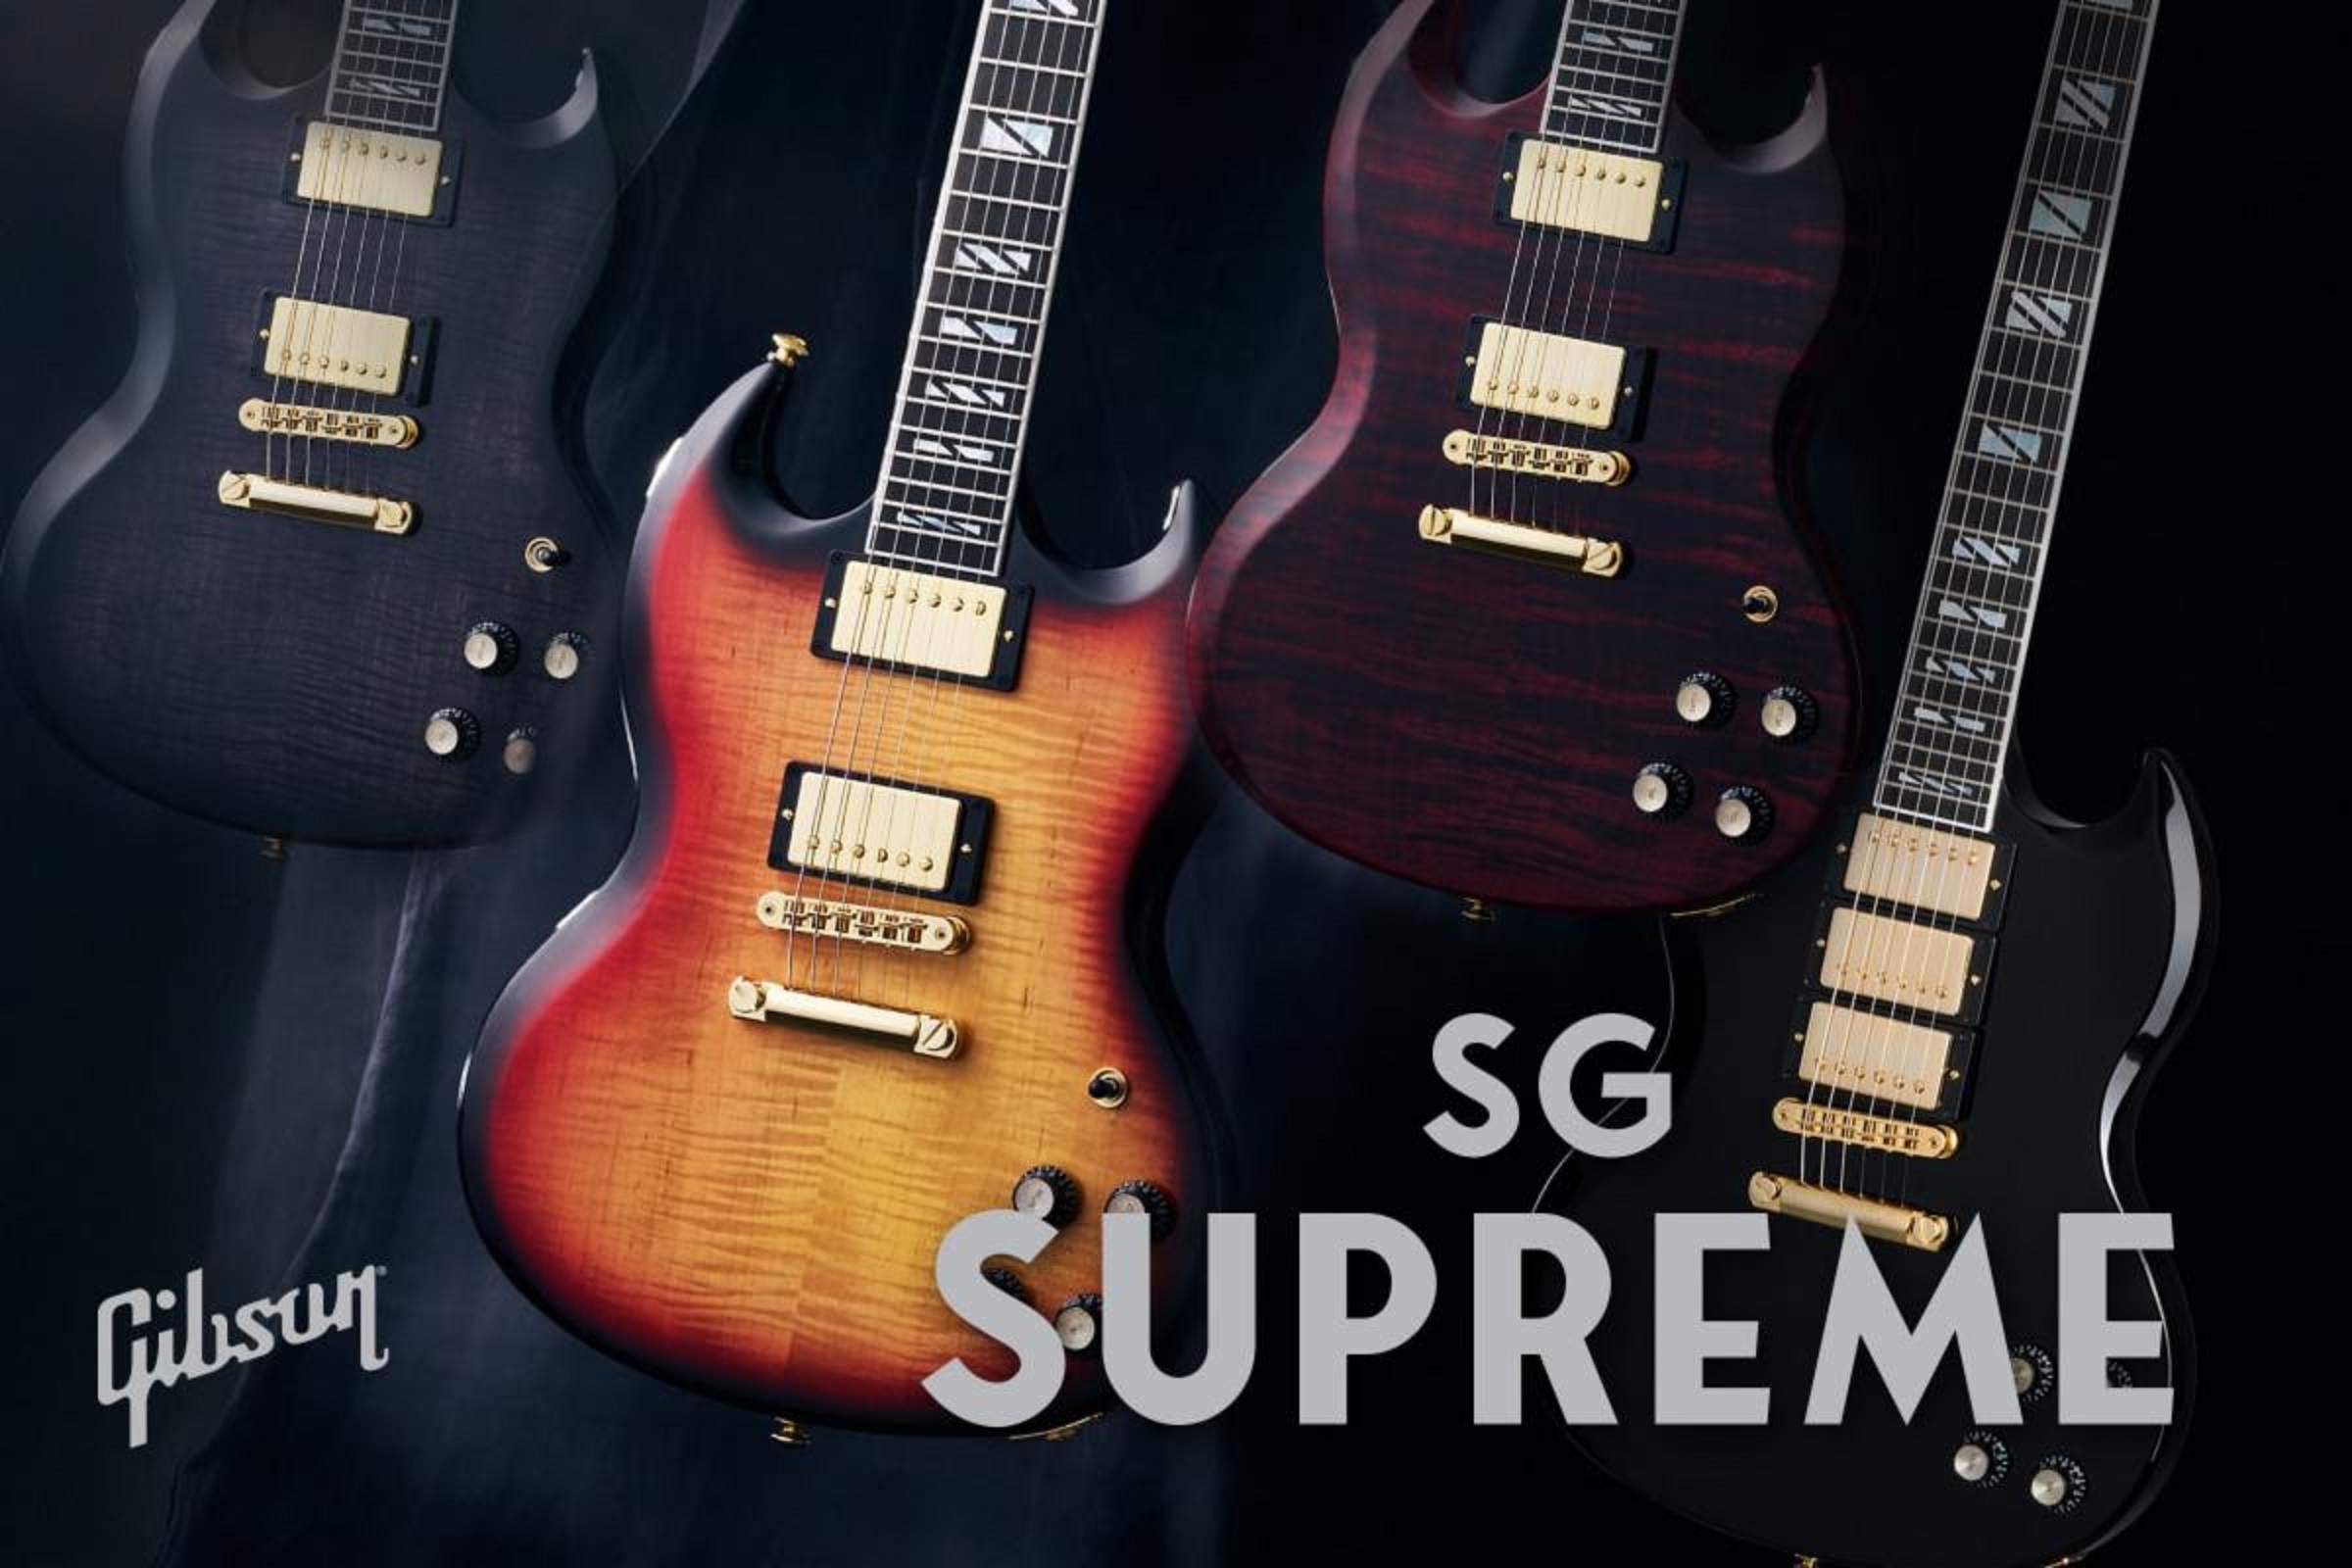 Legendary Gibson SG Supreme Returns Two Decades After It First Appeared With Refreshed Features